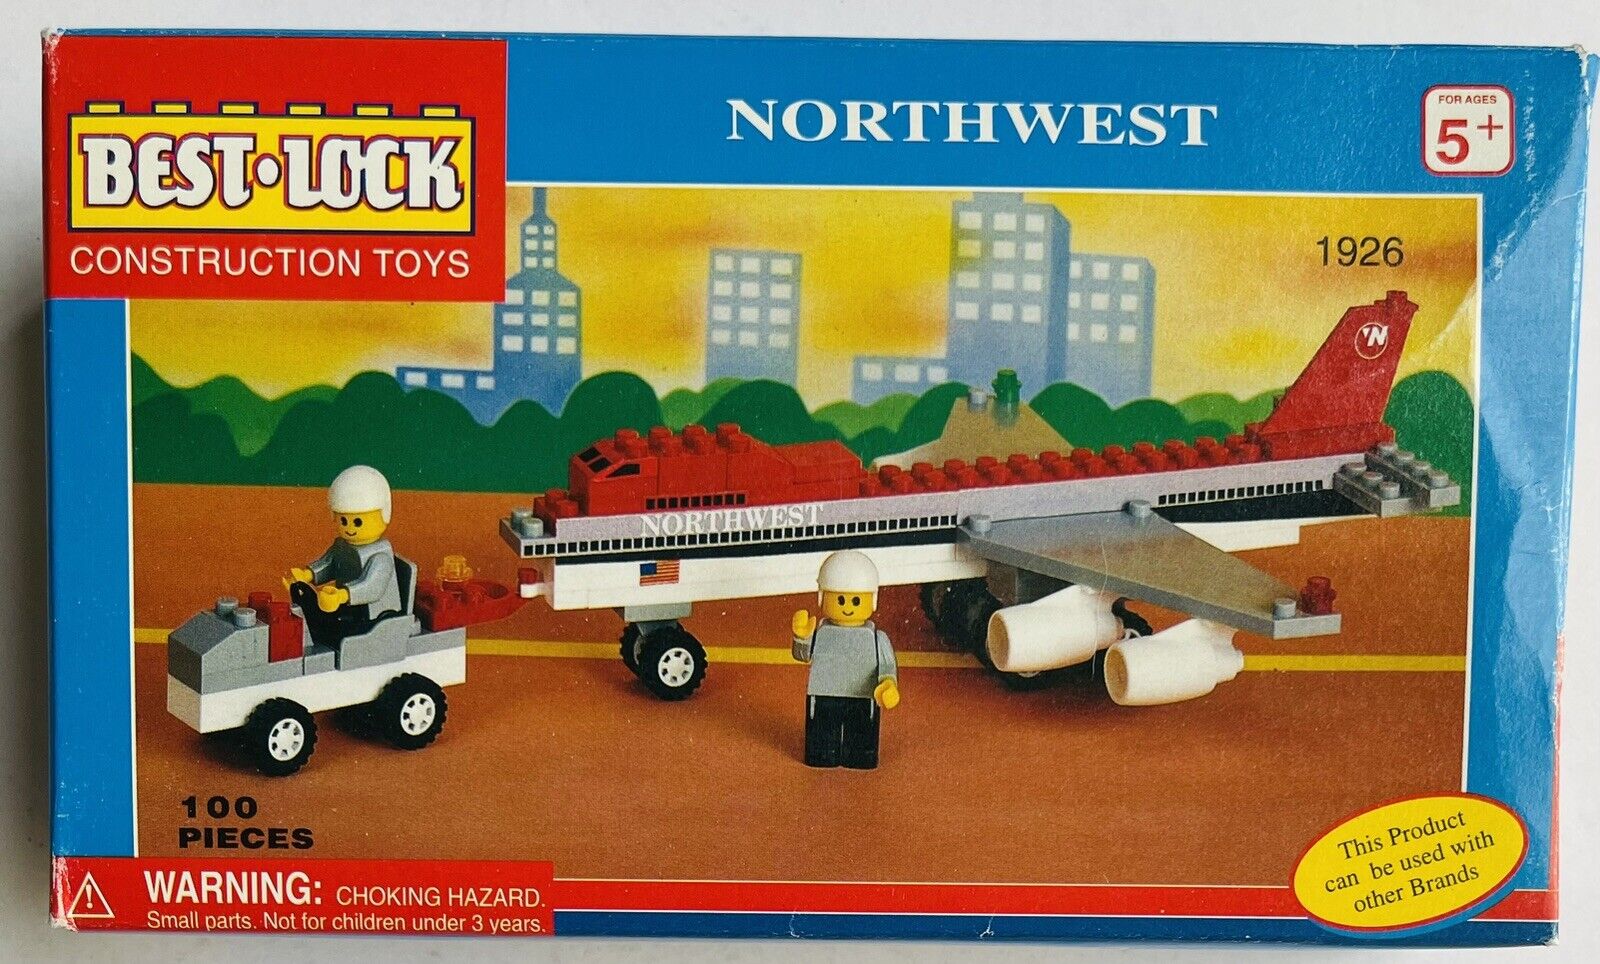 Northwest Airlines Airport Click Block Play Set by Best Lock - New in Box